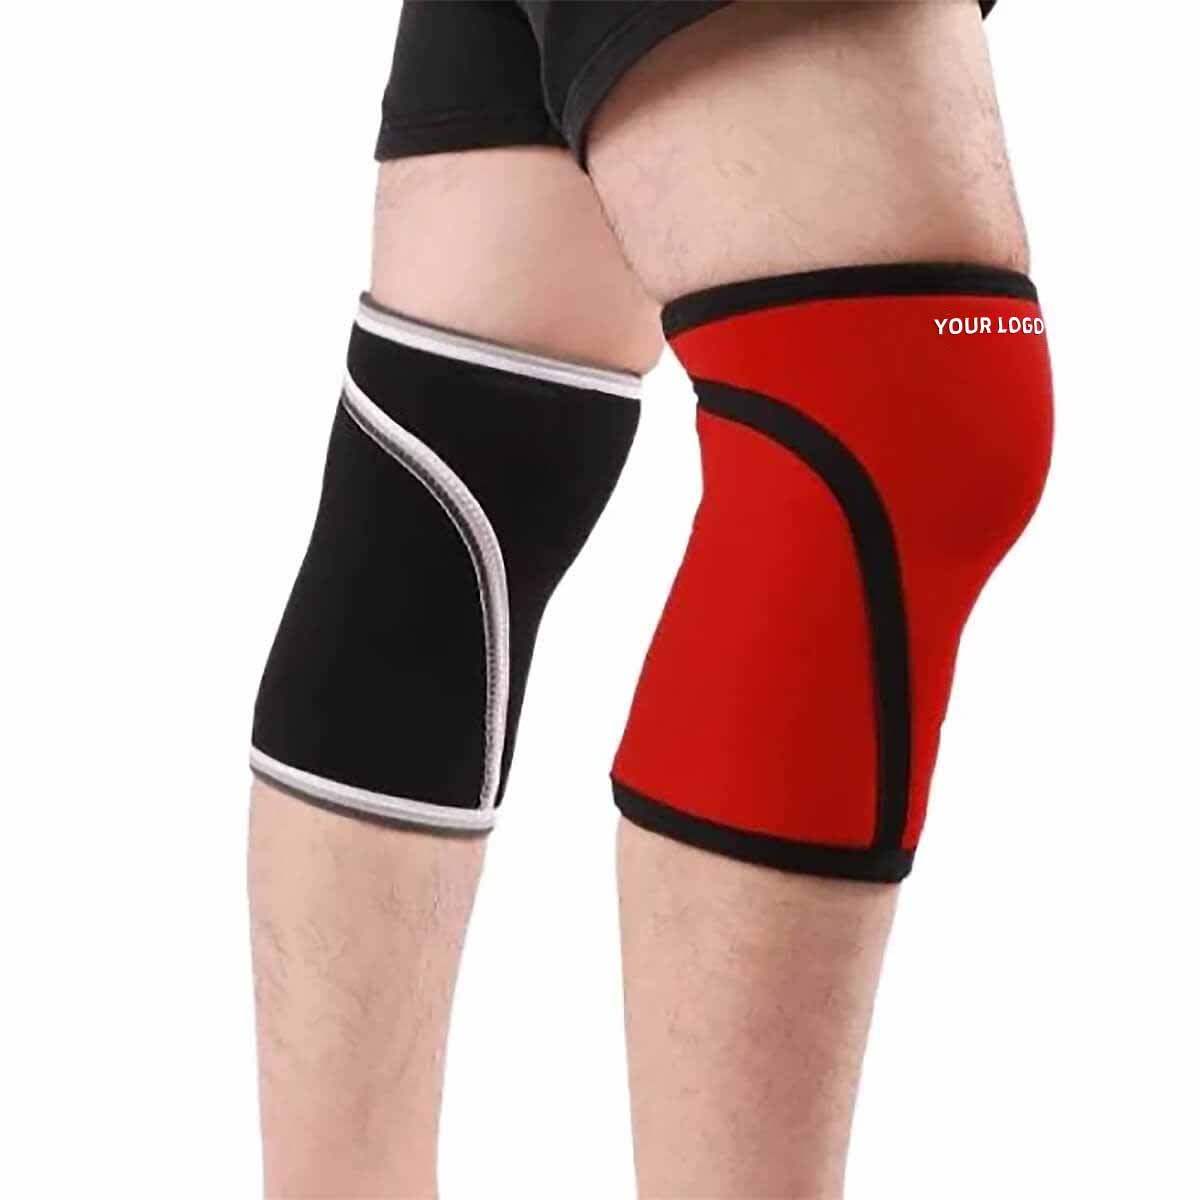 231213 Sleeve Knee Brace - The Best Knee Support for Various Needs